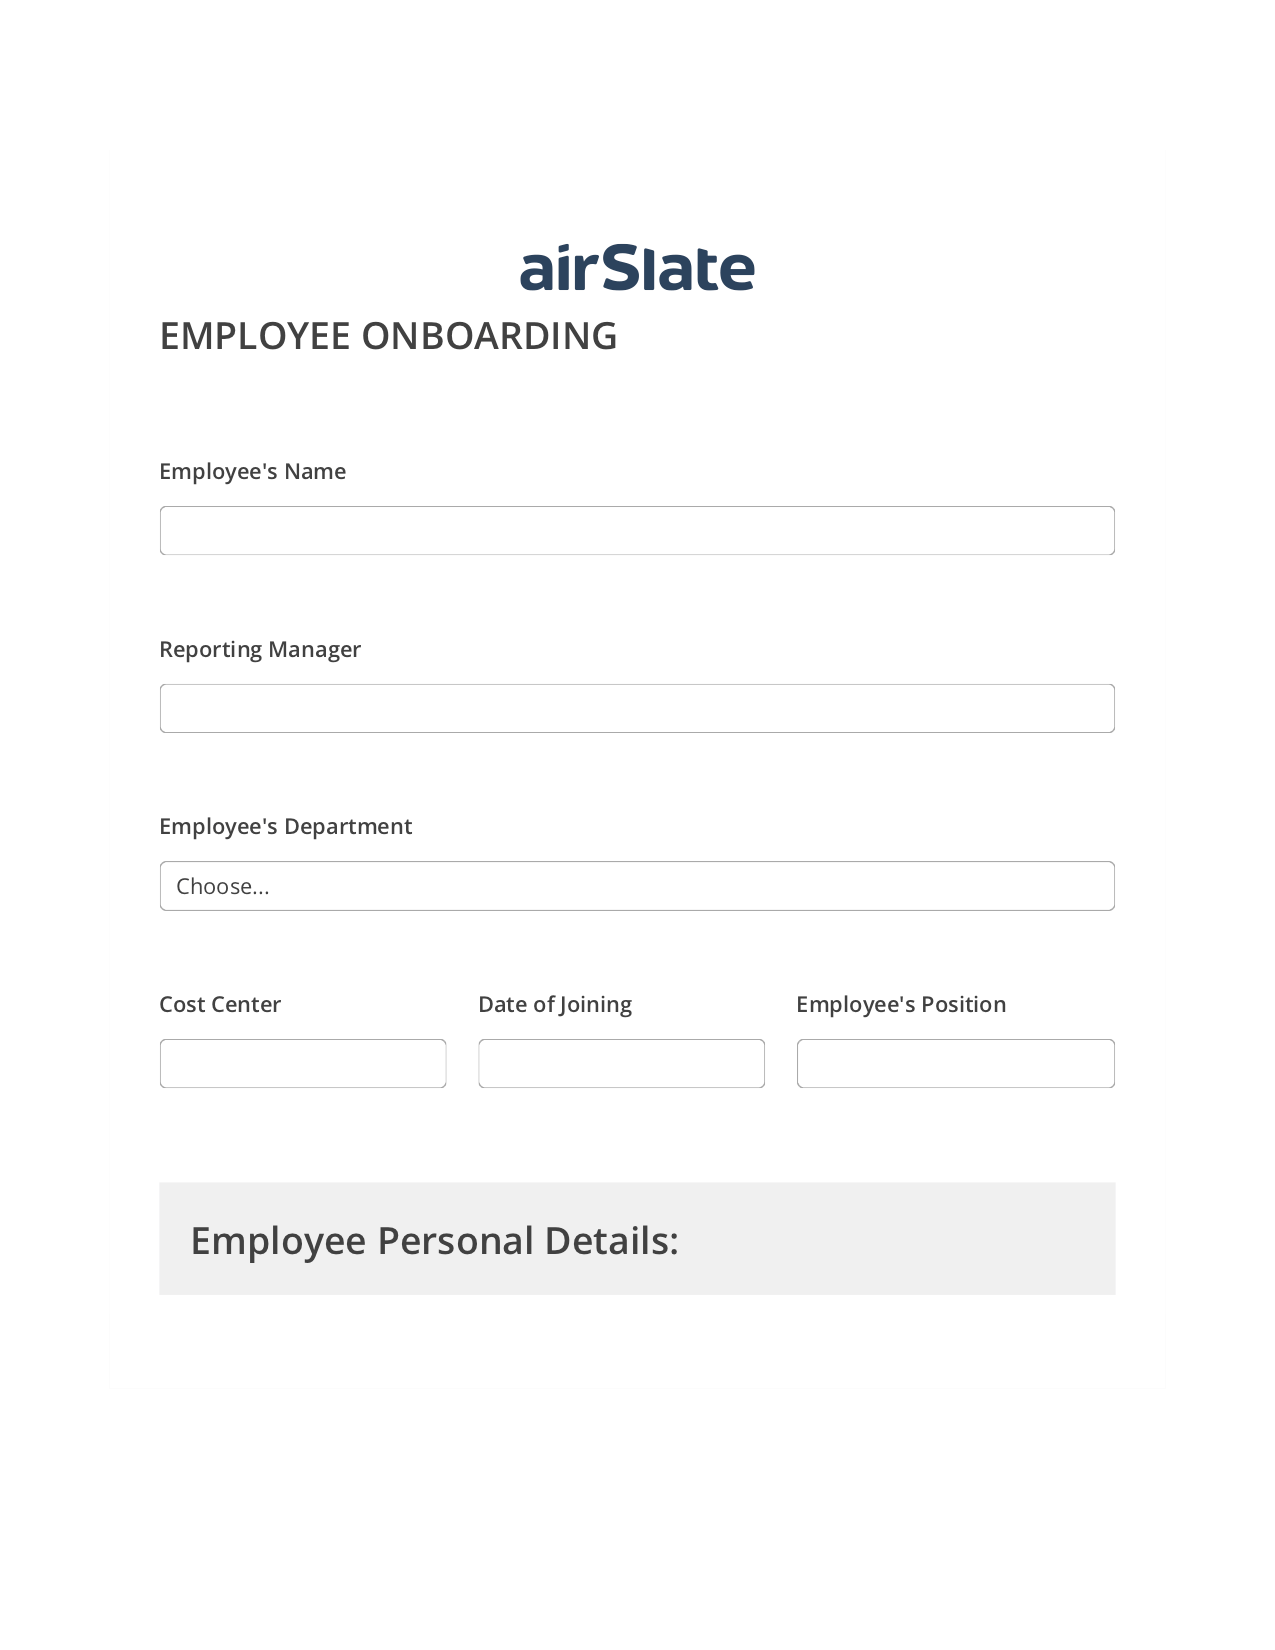 Employee Onboarding Workflow Pre-fill from Google Sheet Dropdown Options Bot, Text Message Notification Bot, Export to NetSuite Bot